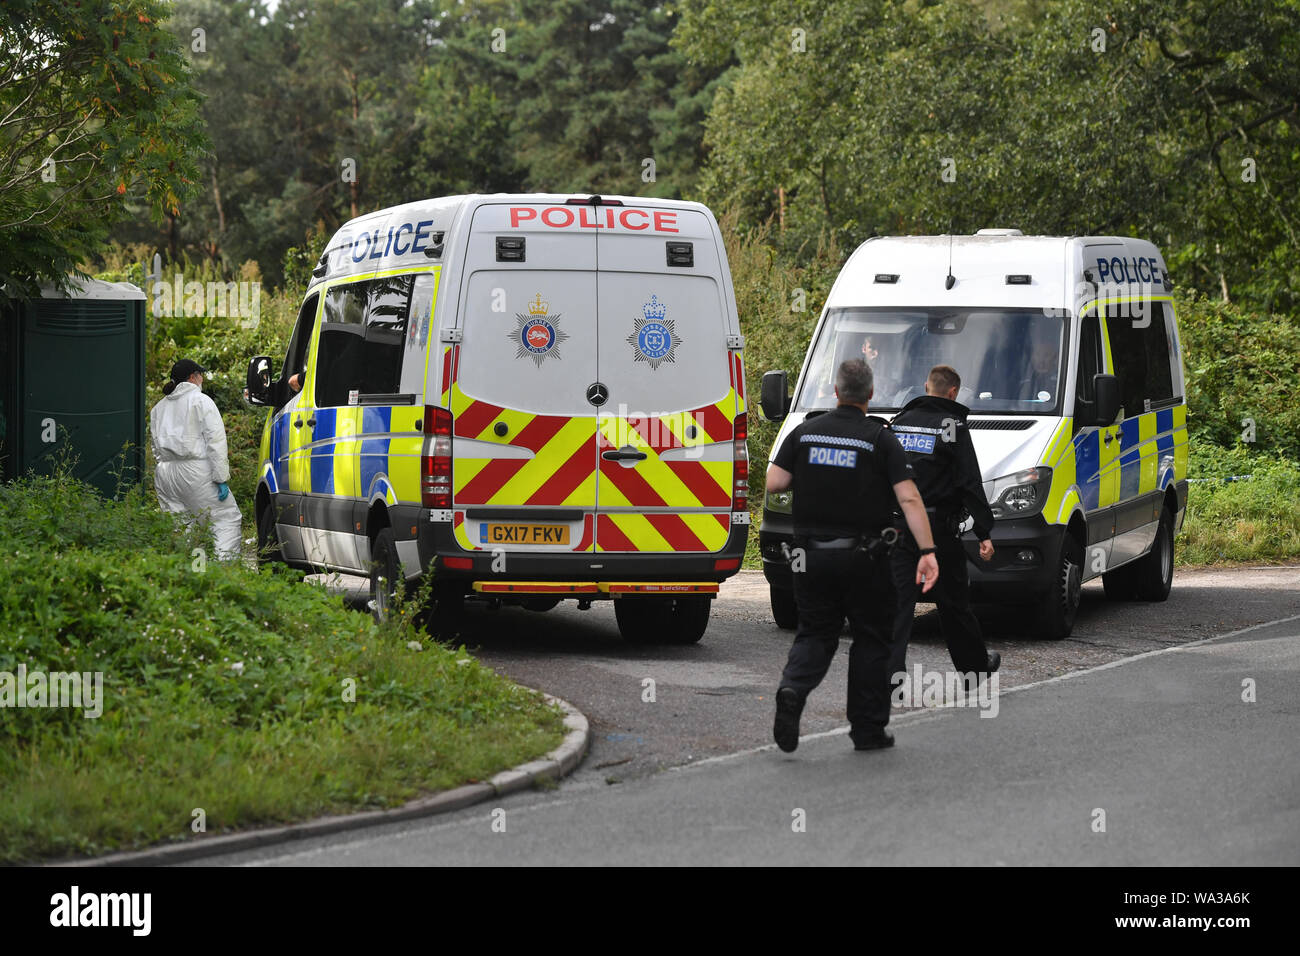 Police at a caravan site near Burghfield Common in Berkshire, after the death of Thames Valley Police officer Pc Andrew Harper, 28, following a 'serious incident' at about 11.30pm on Thursday near the A4 Bath Road, between Reading and Newbury, at the village of Sulhamstead in Berkshire. Stock Photo